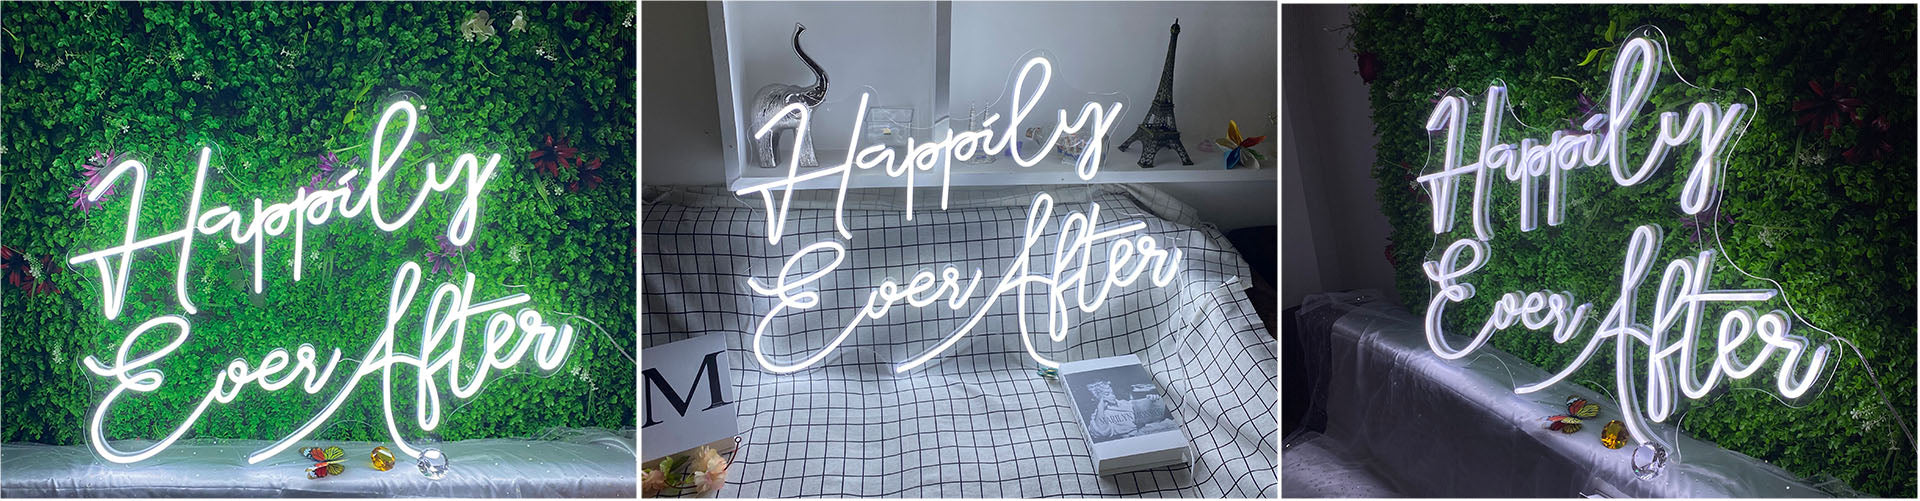 Happily Ever After wedding theme decor